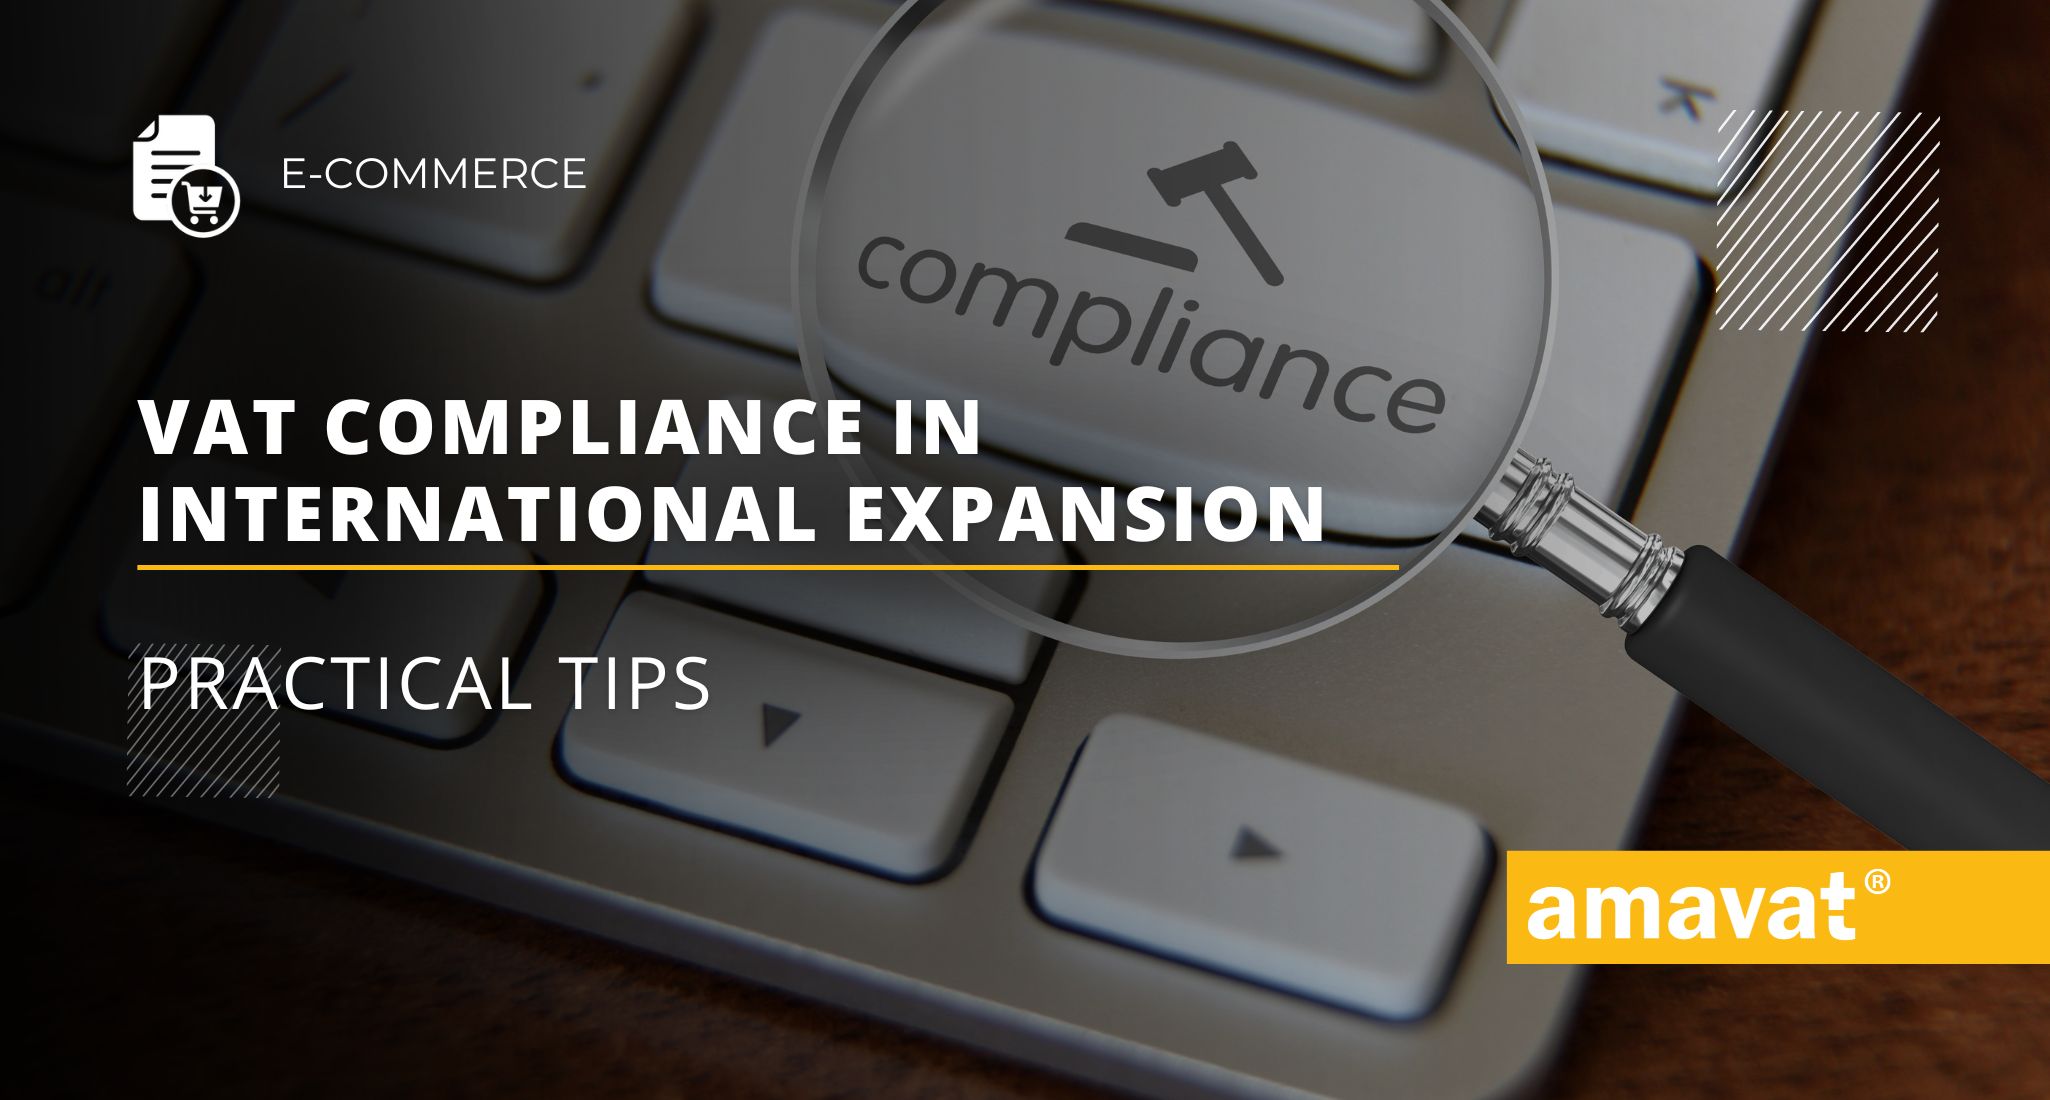 : VAT Compliance in international expansion: Practical tips